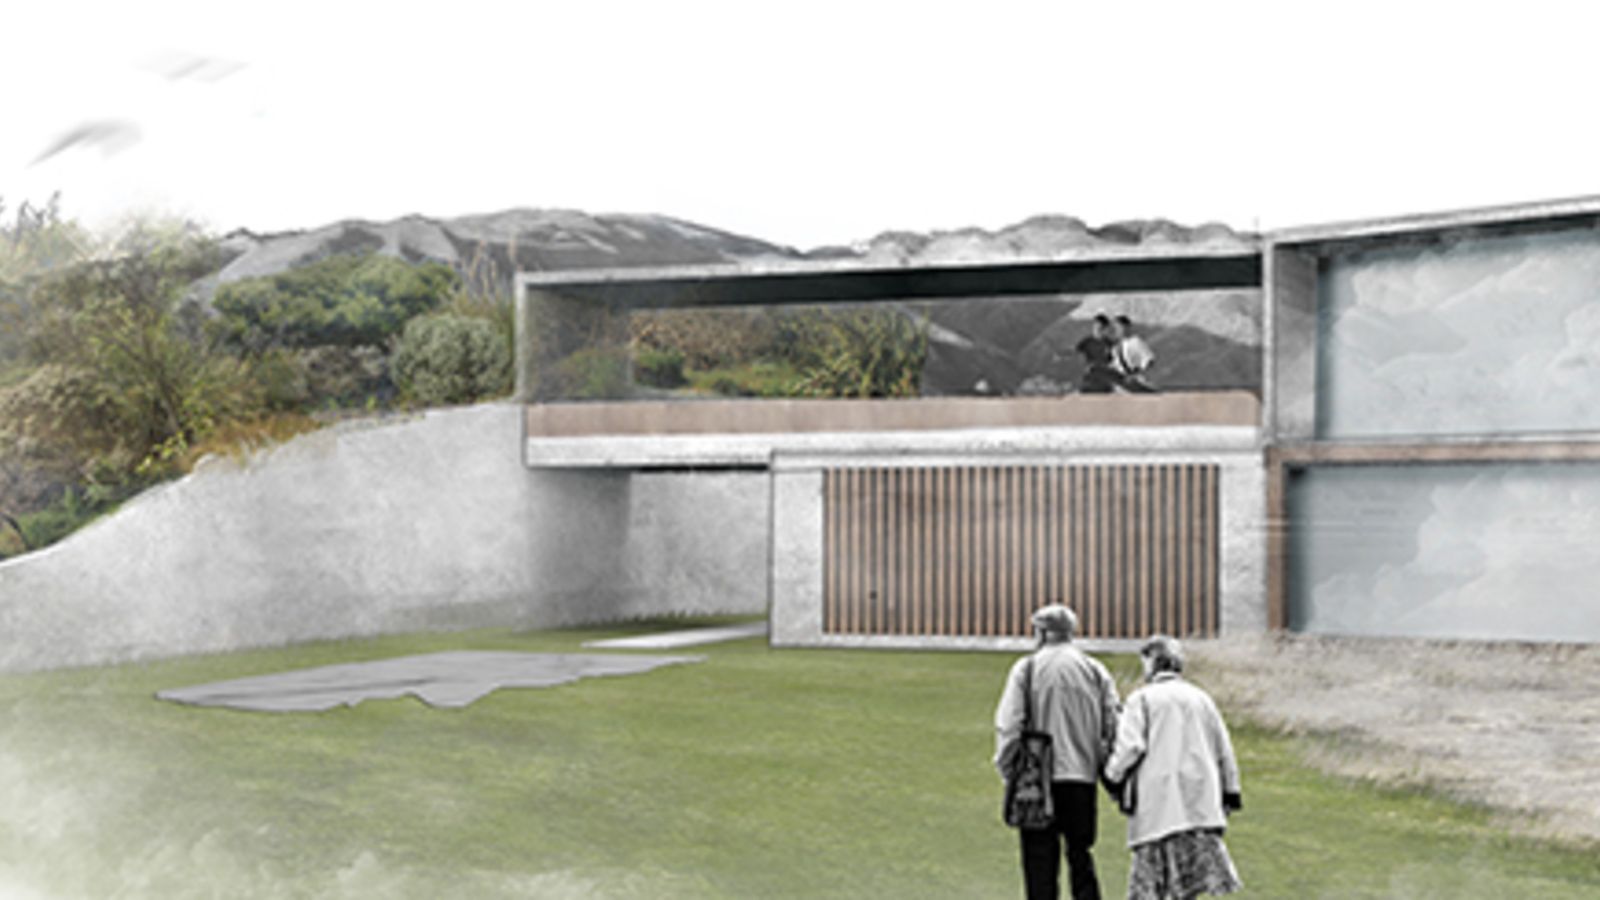 Imagery of a landscape architecture project by Billy Pearce: a concrete and wood building embedded in a hill, with people walking, and mountains in the background.